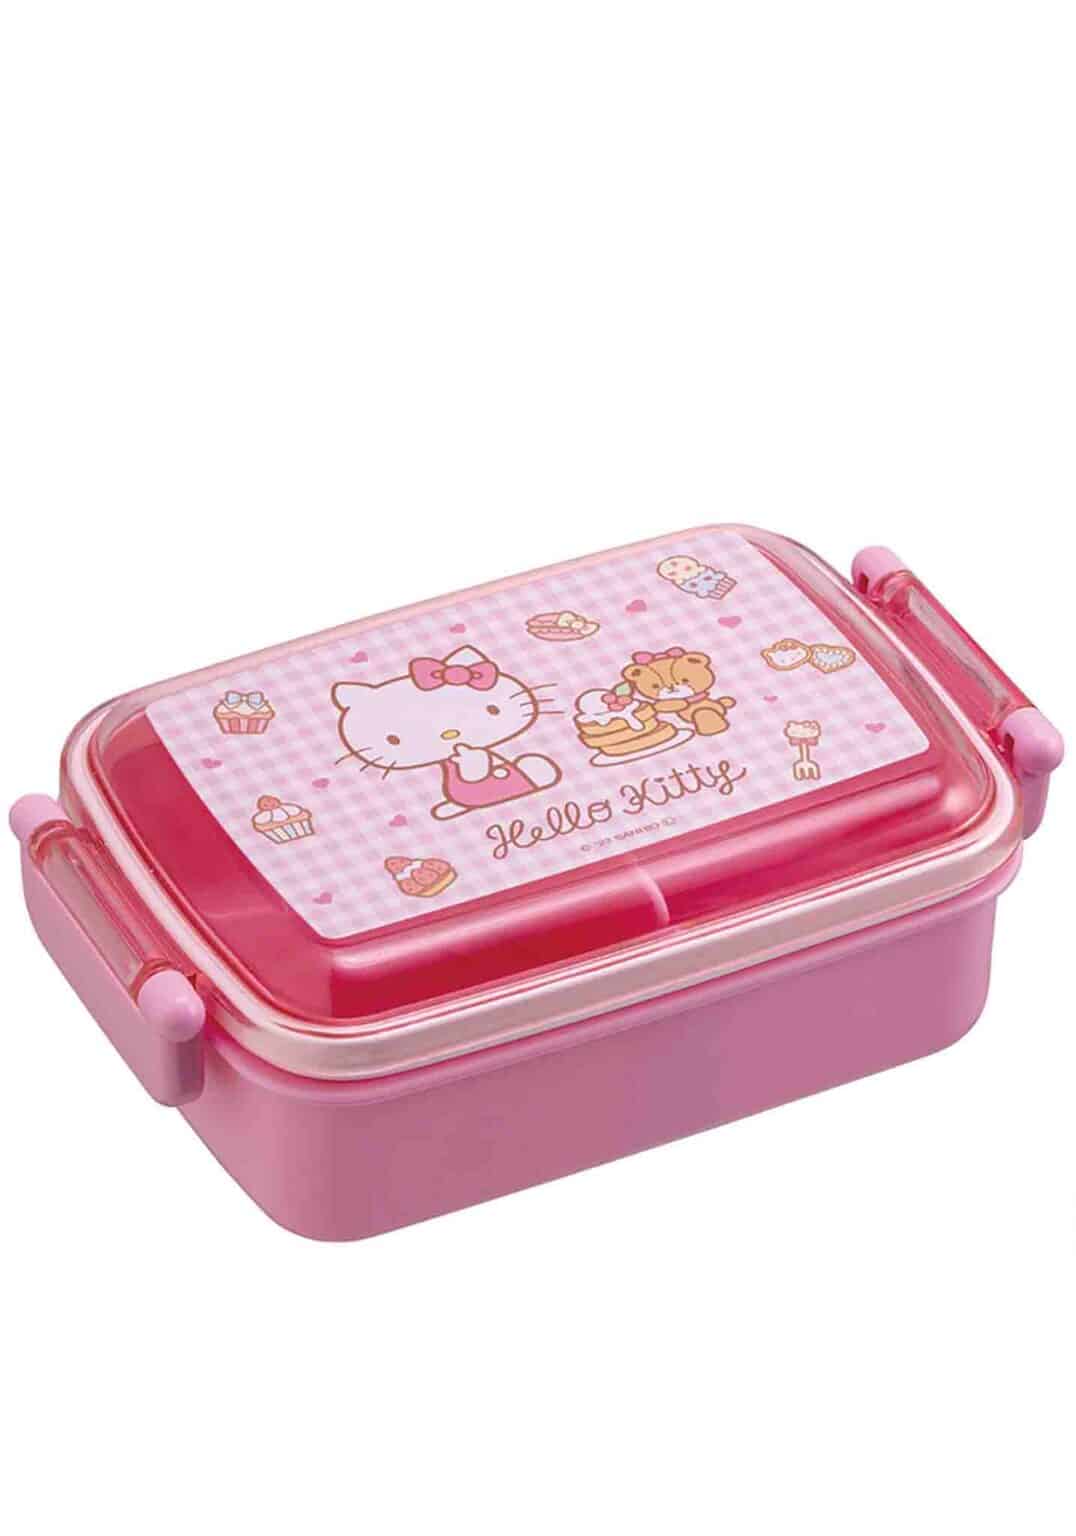 Clever Idiots Hello Kitty Pancakes Bento Lunch Box Kawaii Gifts 4973307608155